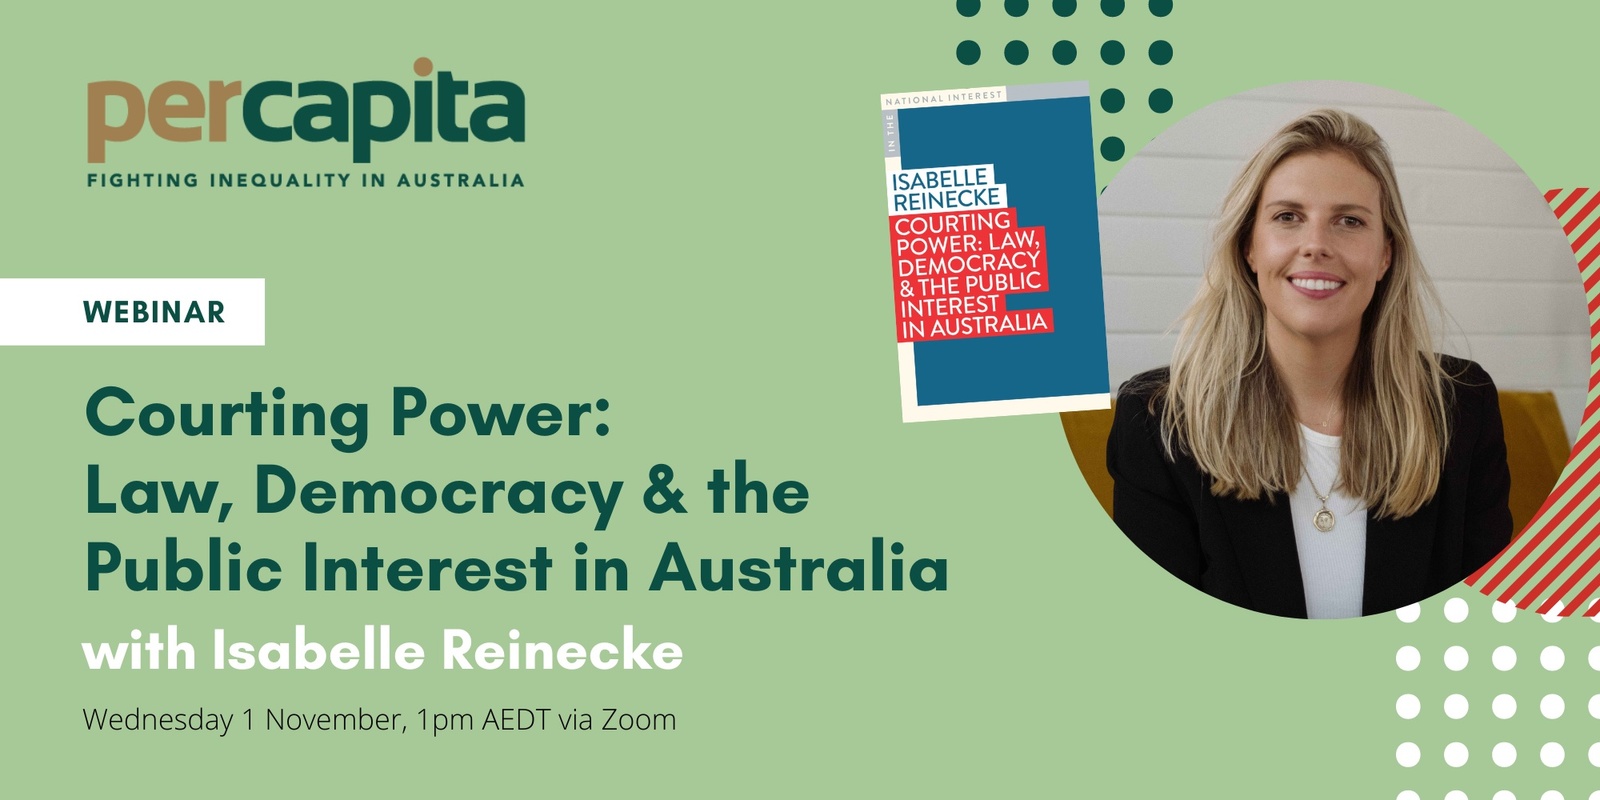 Banner image for WEBINAR: Courting Power: Law, Democracy and the Public Interest in Australia, with Isabelle Reinecke